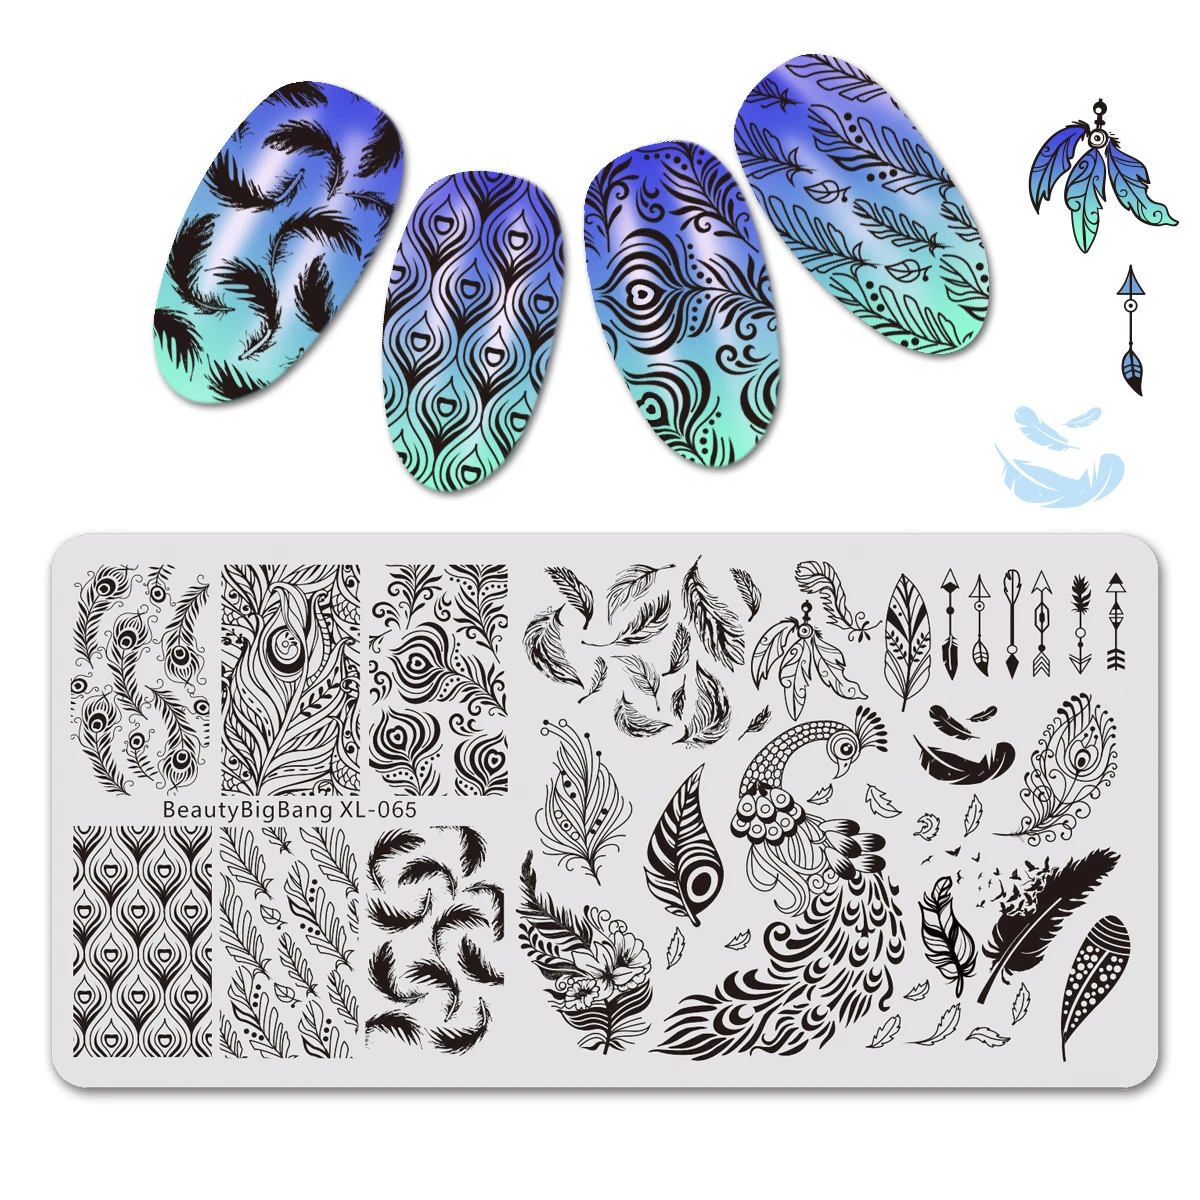 

BeautyBigBang Nail Art Stamping Plate Nail Template Print Stencil Peacock Stainless Steel Stamp Templates XL-065 Feather Image